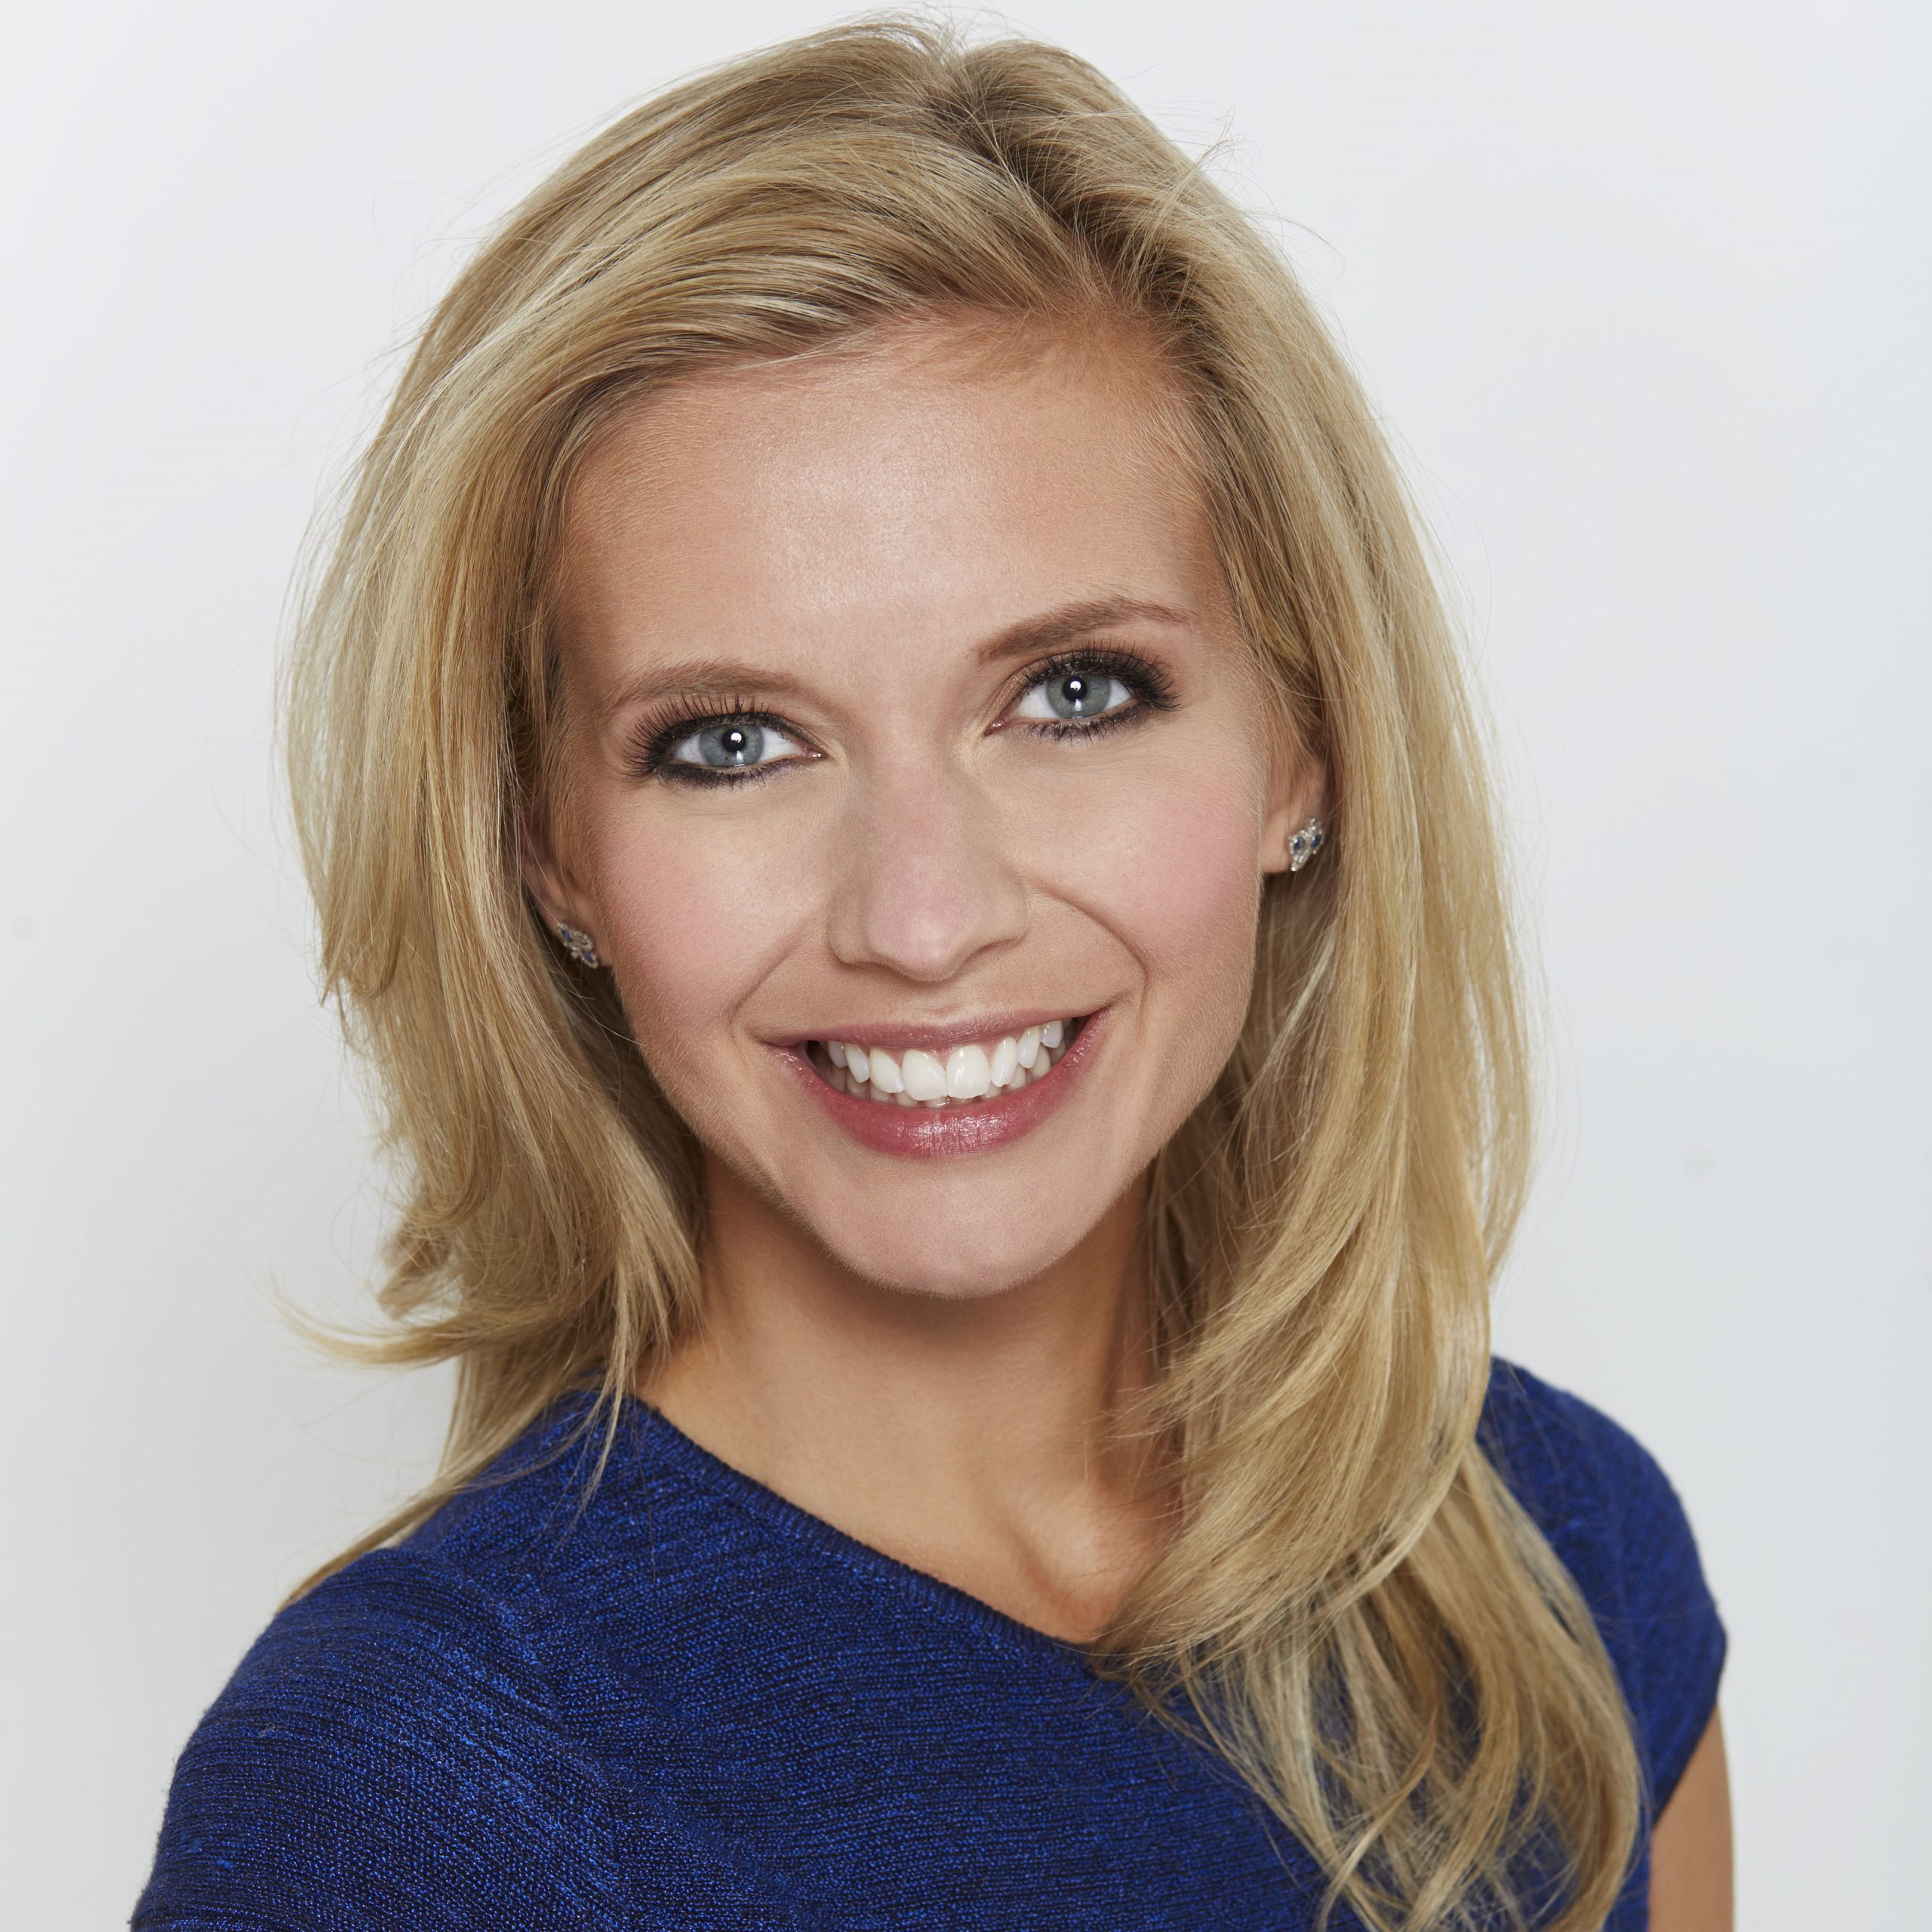 Rachel-Riley-mathematician-Countdown-Host-Broadcaster-at-Great-British-Speakers